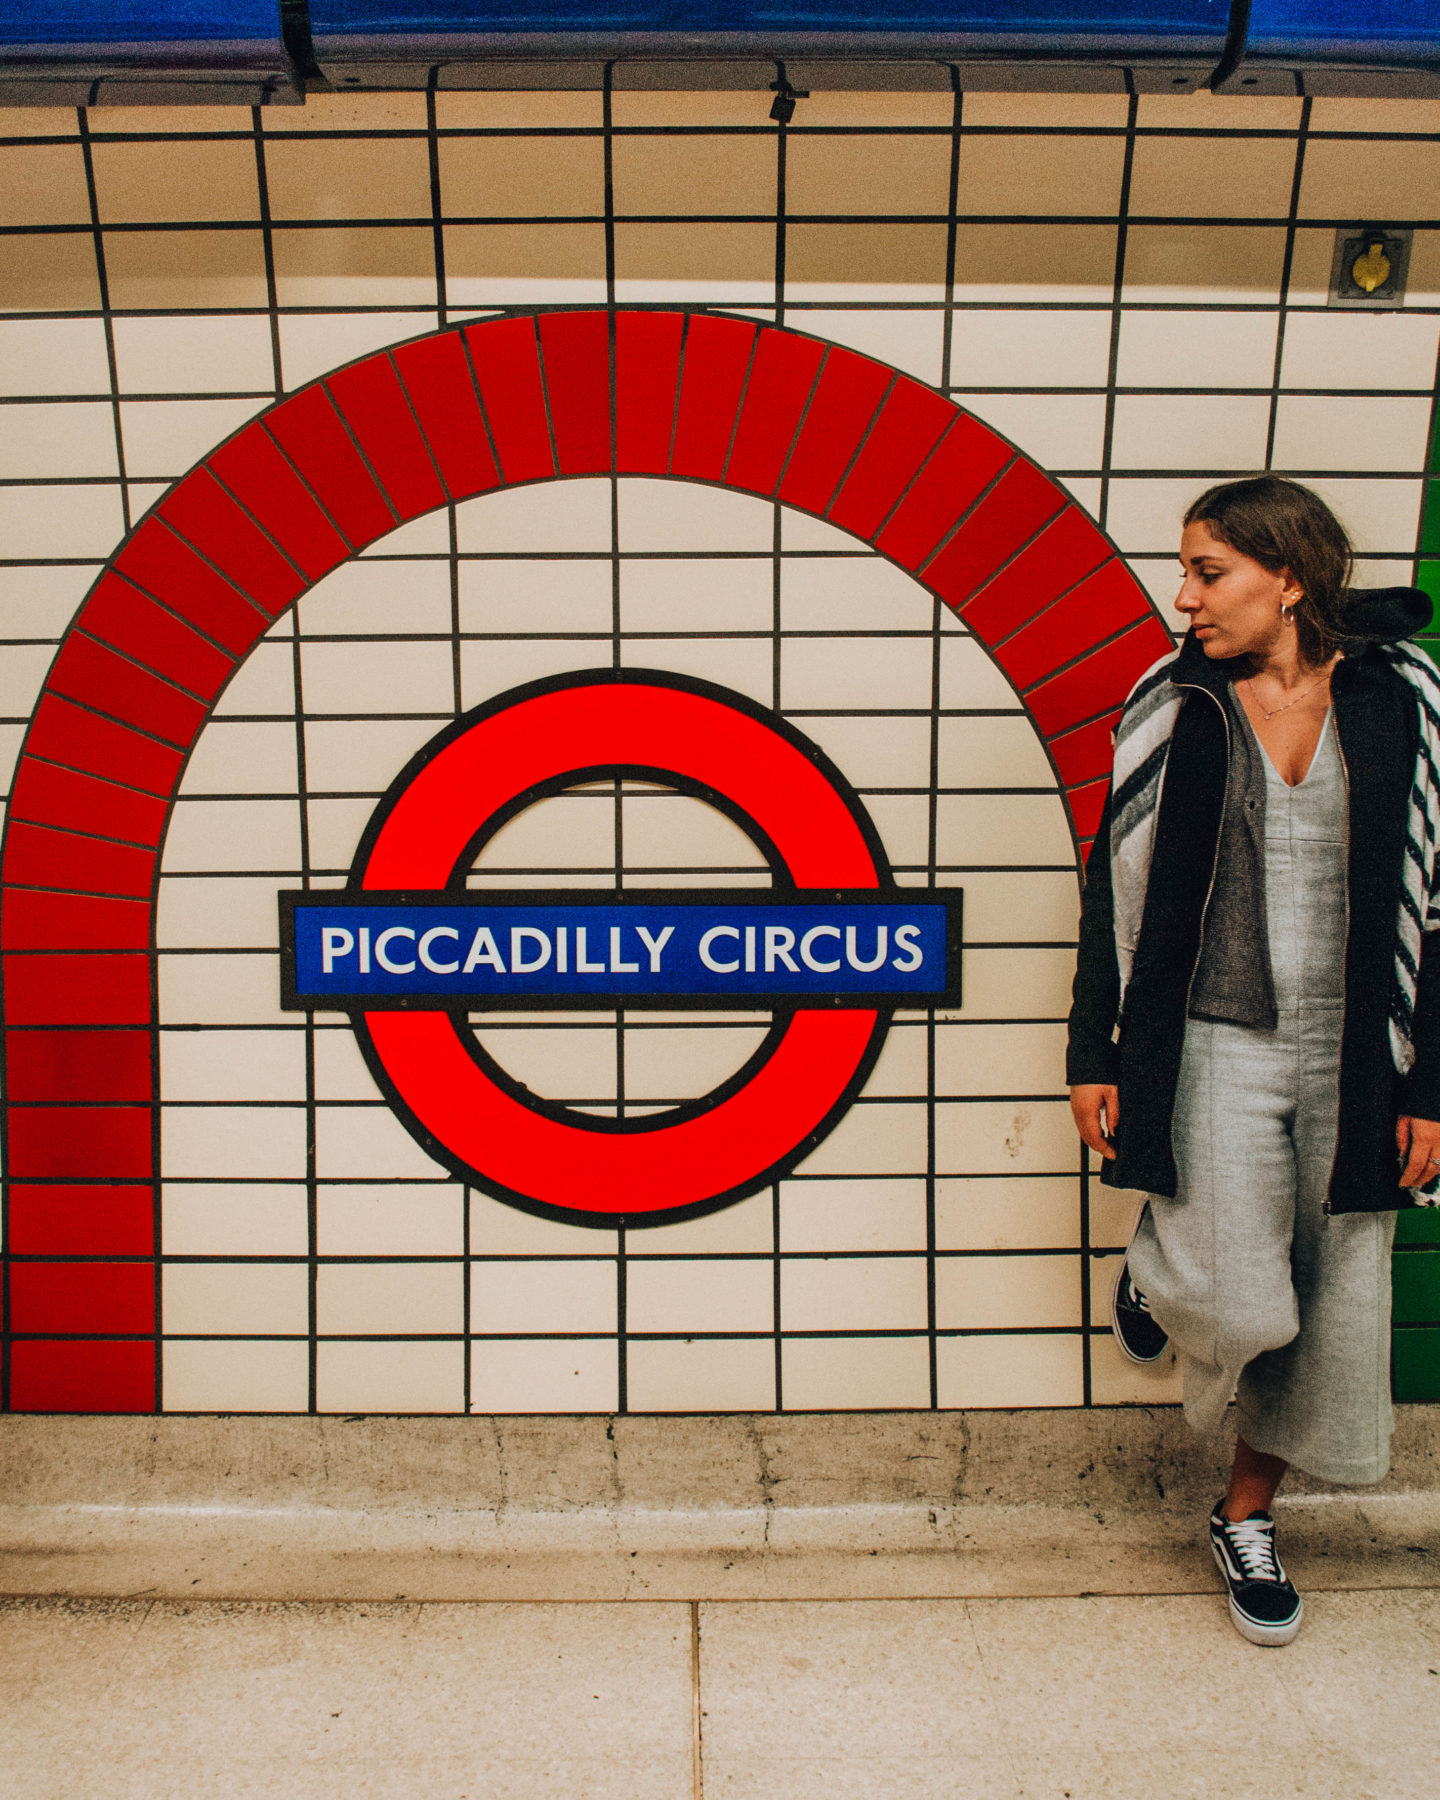 cosa vedere a londra: piccadilly circus